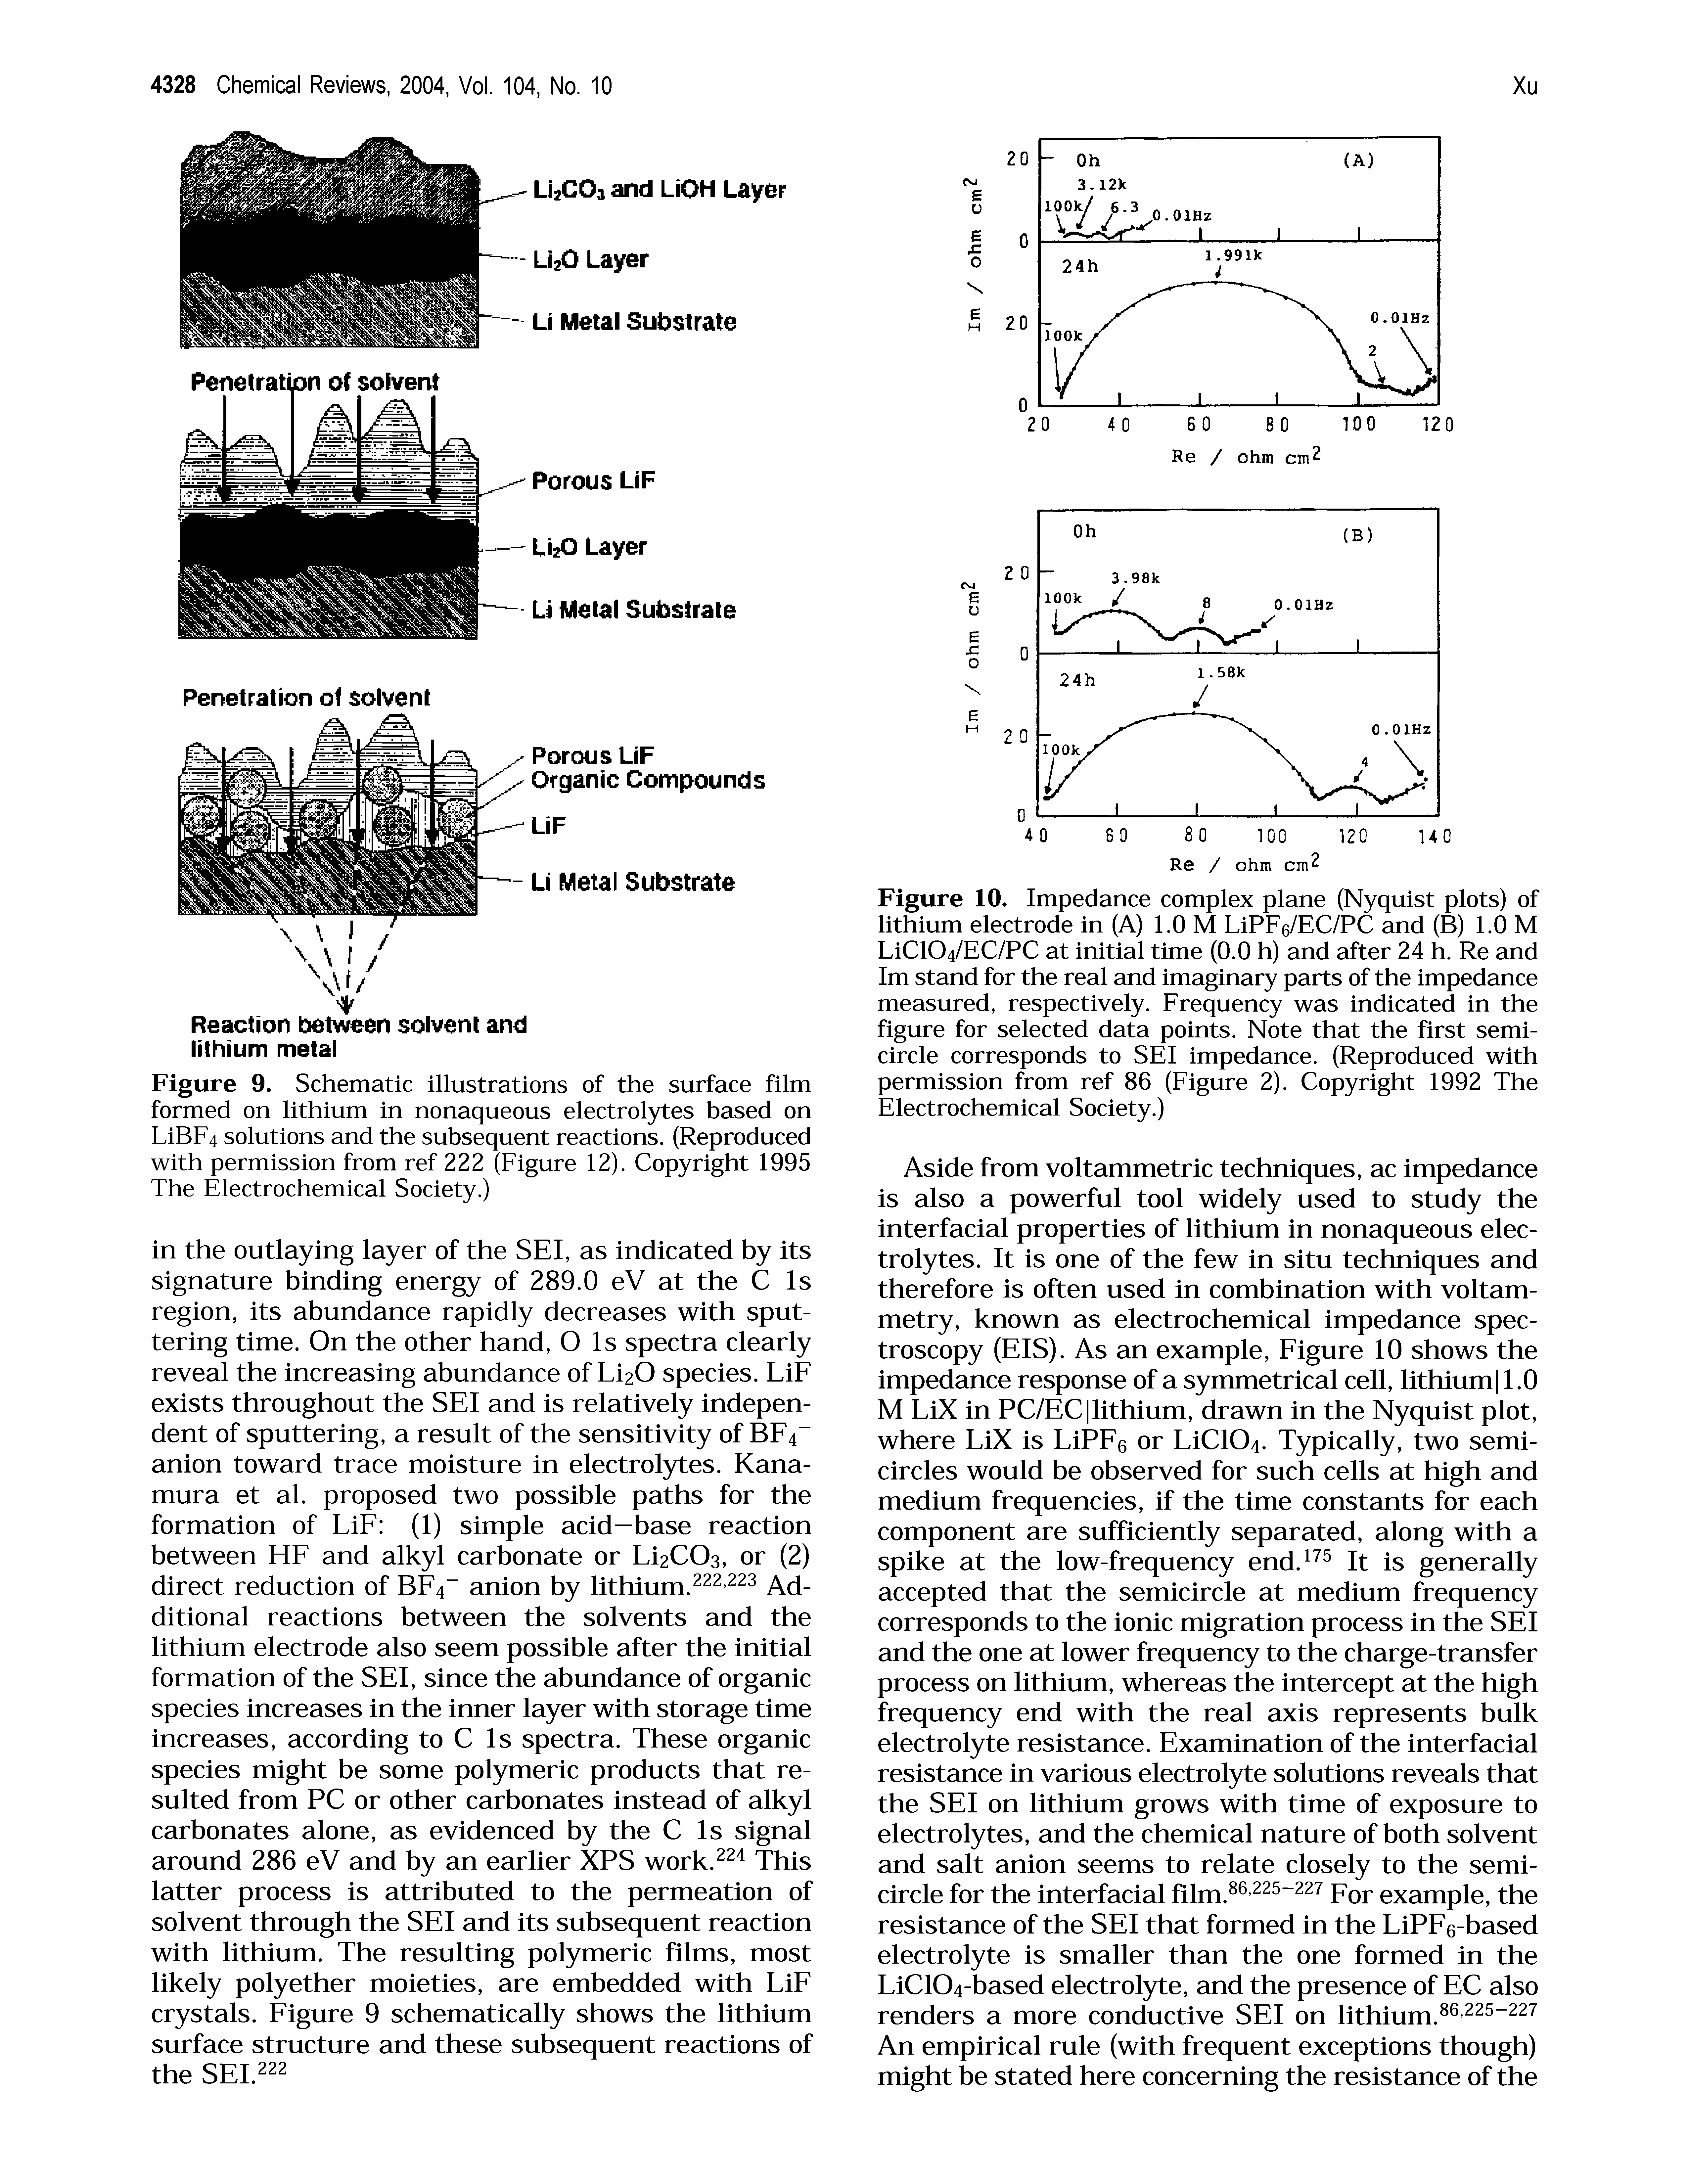 Figure 9. Schematic illustrations of the surface film formed on lithium in nonaqueous electrolytes based on LiBp4 solutions and the subsequent reactions. (Reproduced with permission from ref 222 (Figure 12). Copyright 1995 The Electrochemical Society.)...